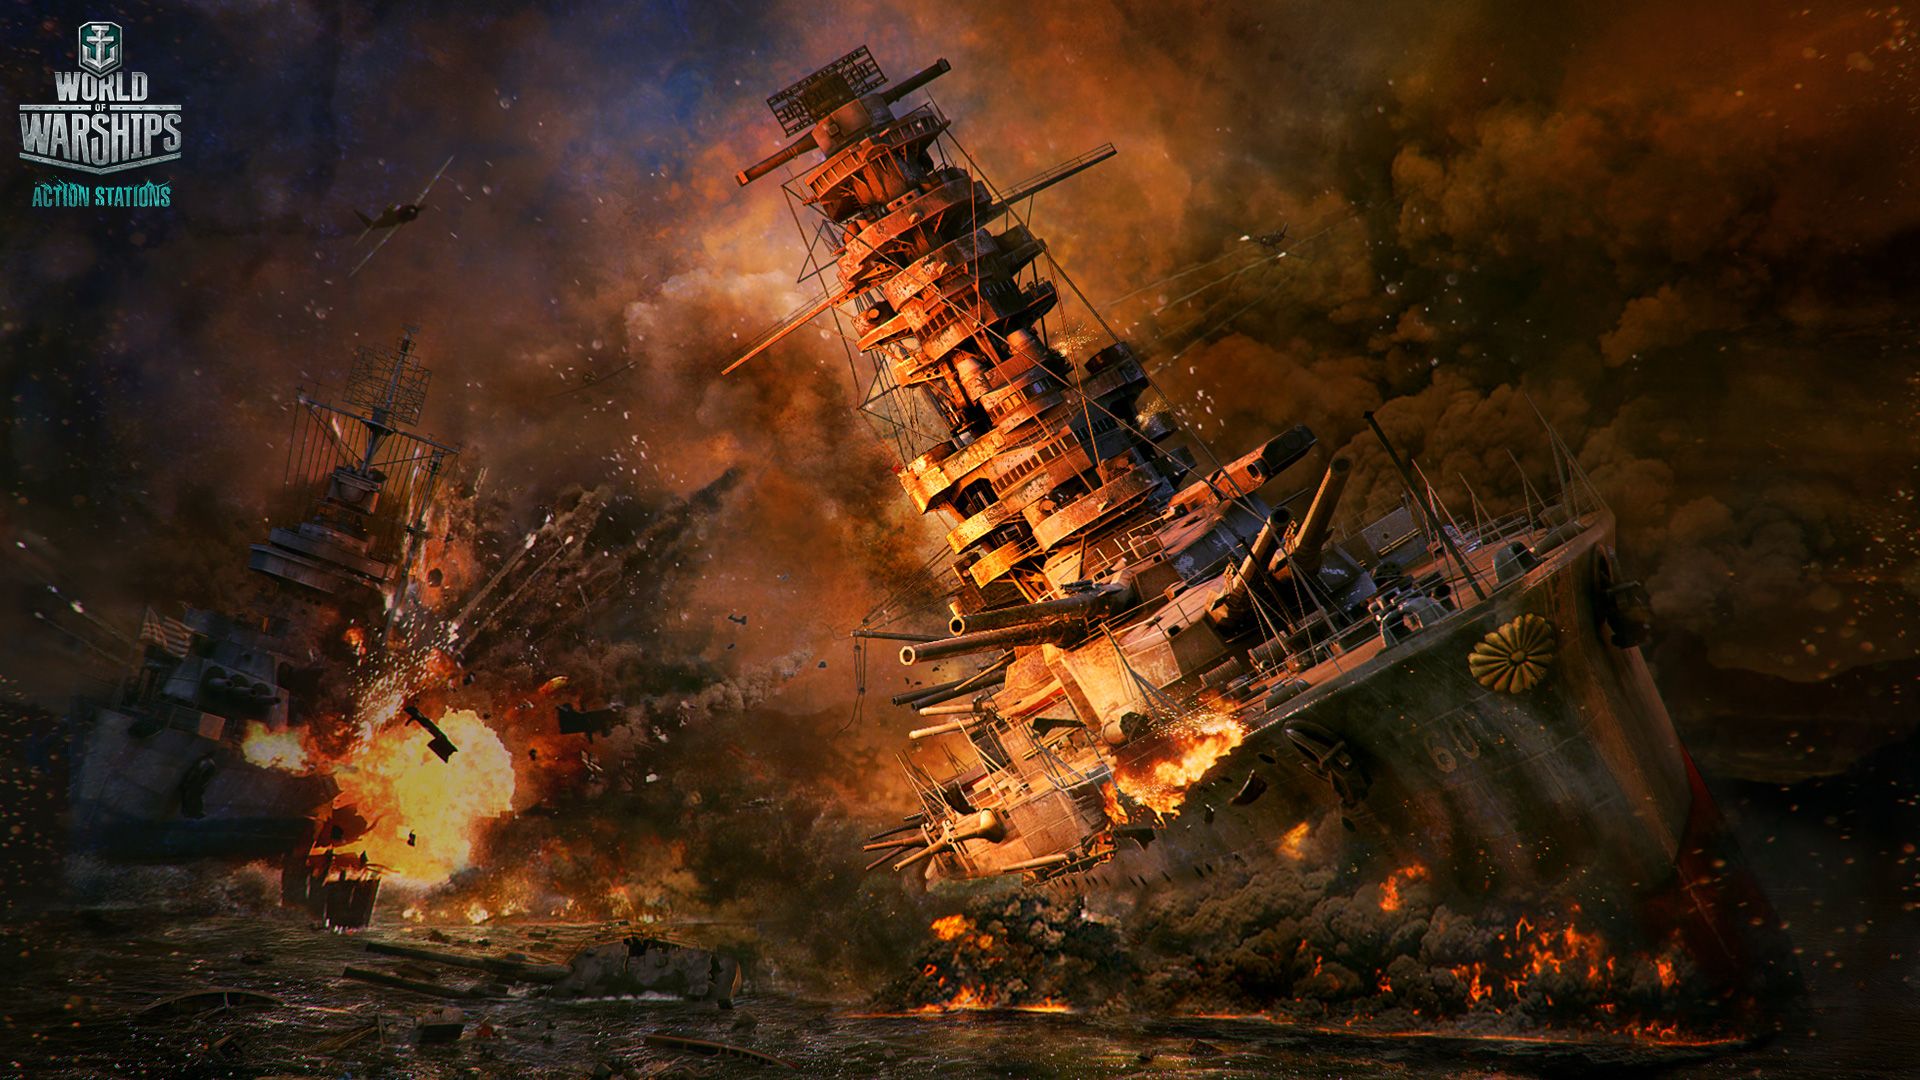 Enlist in the World of Warships Navy Join the ranks of the Closed